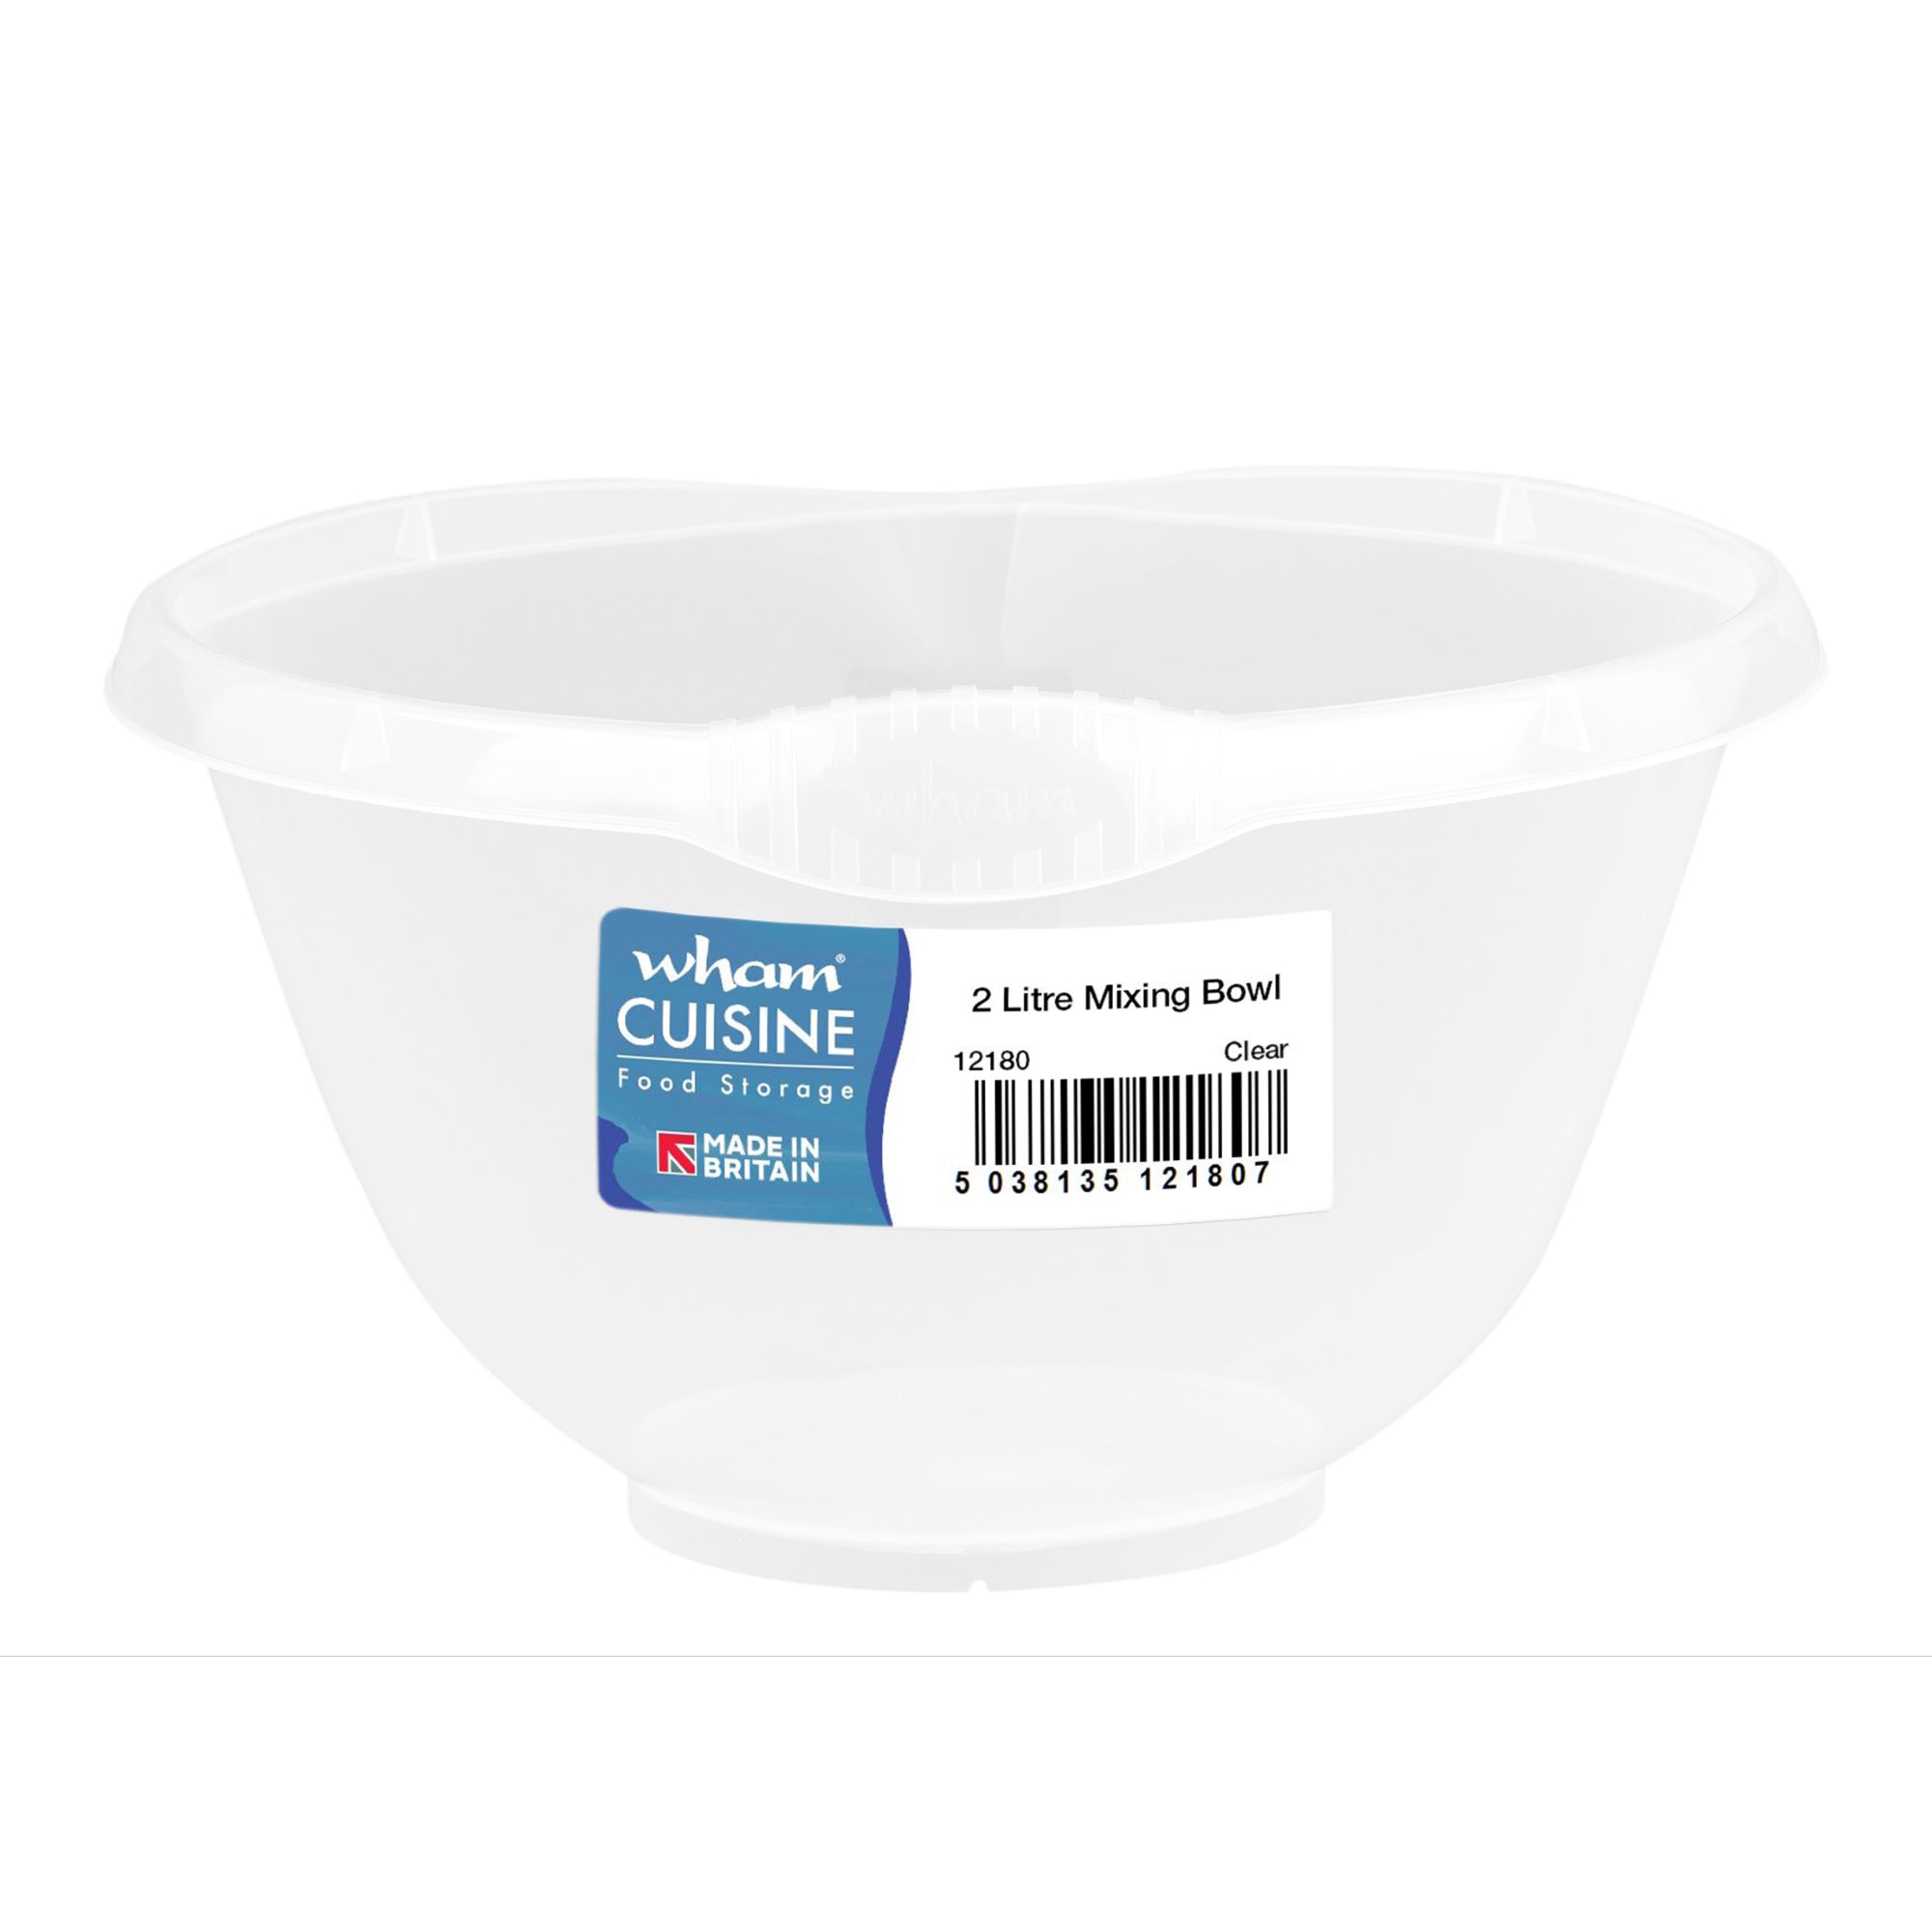 Wham 12180 Cuisine Plastic Mixing Bowl 2Ltr - Clear - Premium Mixing Bowls from What More UK Ltd - Just $1.70! Shop now at W Hurst & Son (IW) Ltd